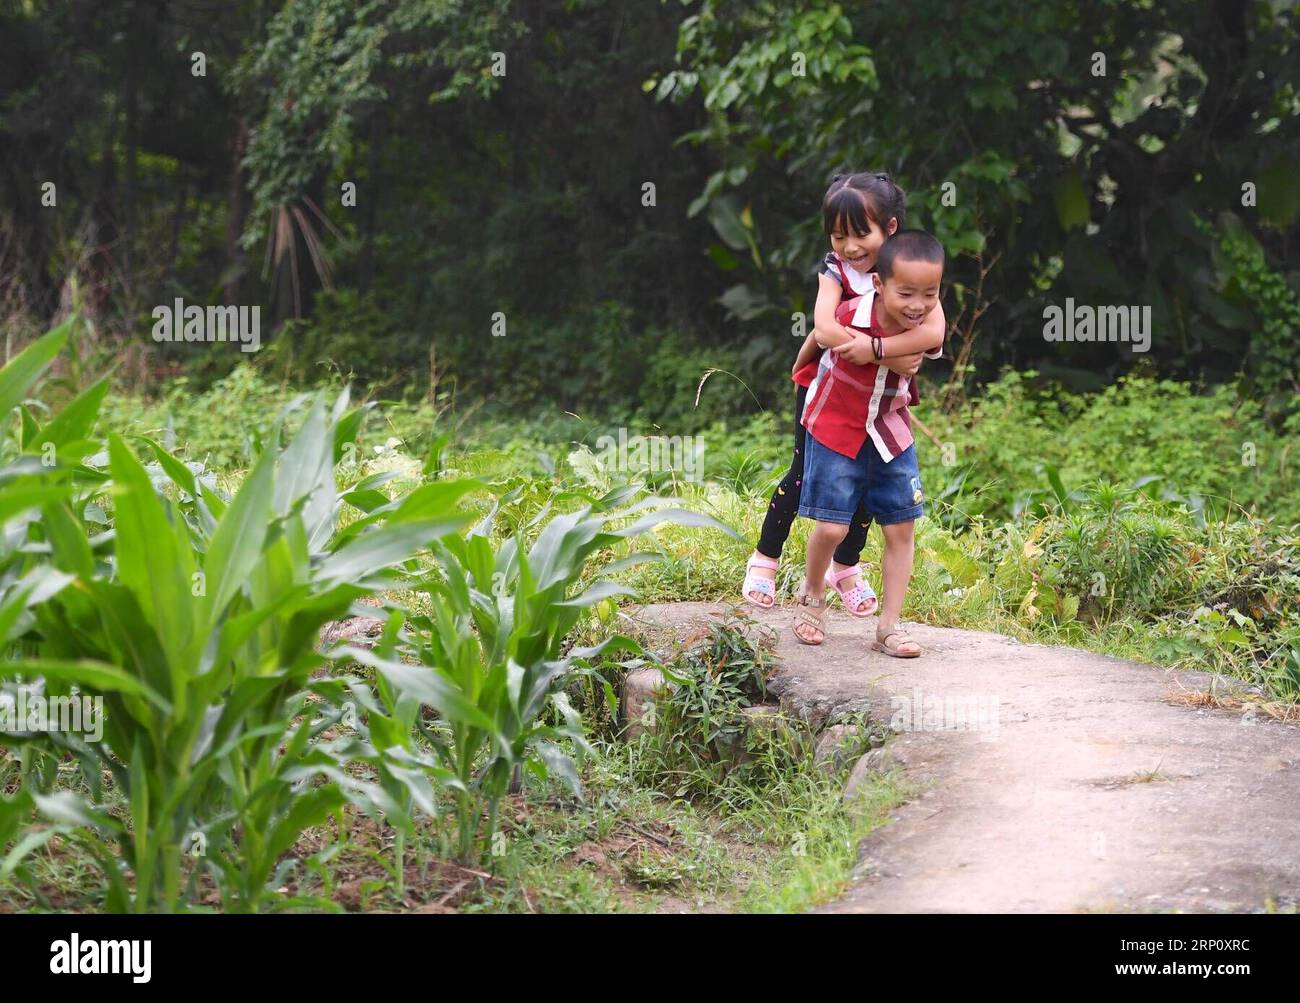 (180529) -- NANCHANG, May 29, 2018 -- Six-year-old Xu Yunlong carries his twin sister Xu Yunfeng on his back in Suolong Village of Yudu County, east China s Jiangxi Province, May 23, 2018. With about 1,000 residents, Suolong Village has 29 cases of multiple births, a high rate considering the modest population size. ) (lmm) CHINA-JIANGXI-VILLAGE-MULTIPLE BIRTHS-TWINS-LIFE (CN) HuxChenhuan PUBLICATIONxNOTxINxCHN Stock Photo